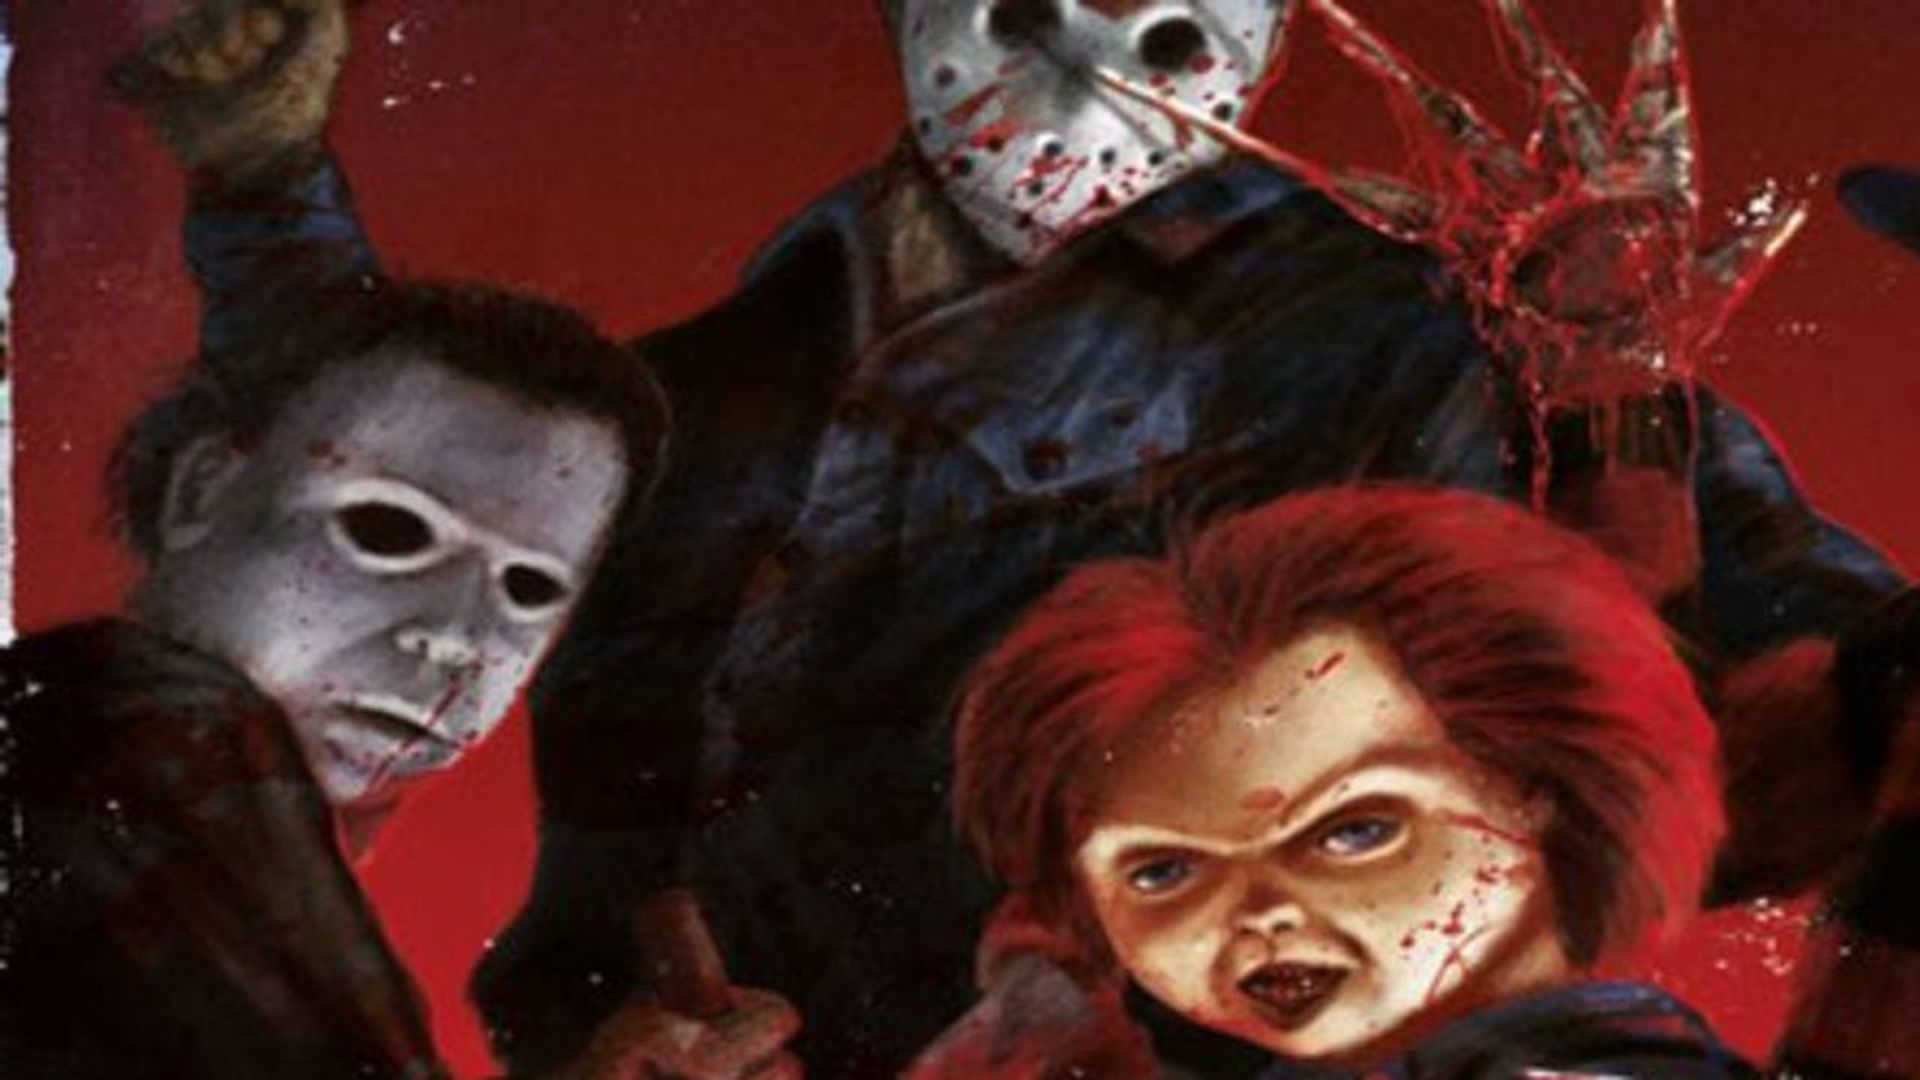 Slice and Dice: The Slasher Film Forever background